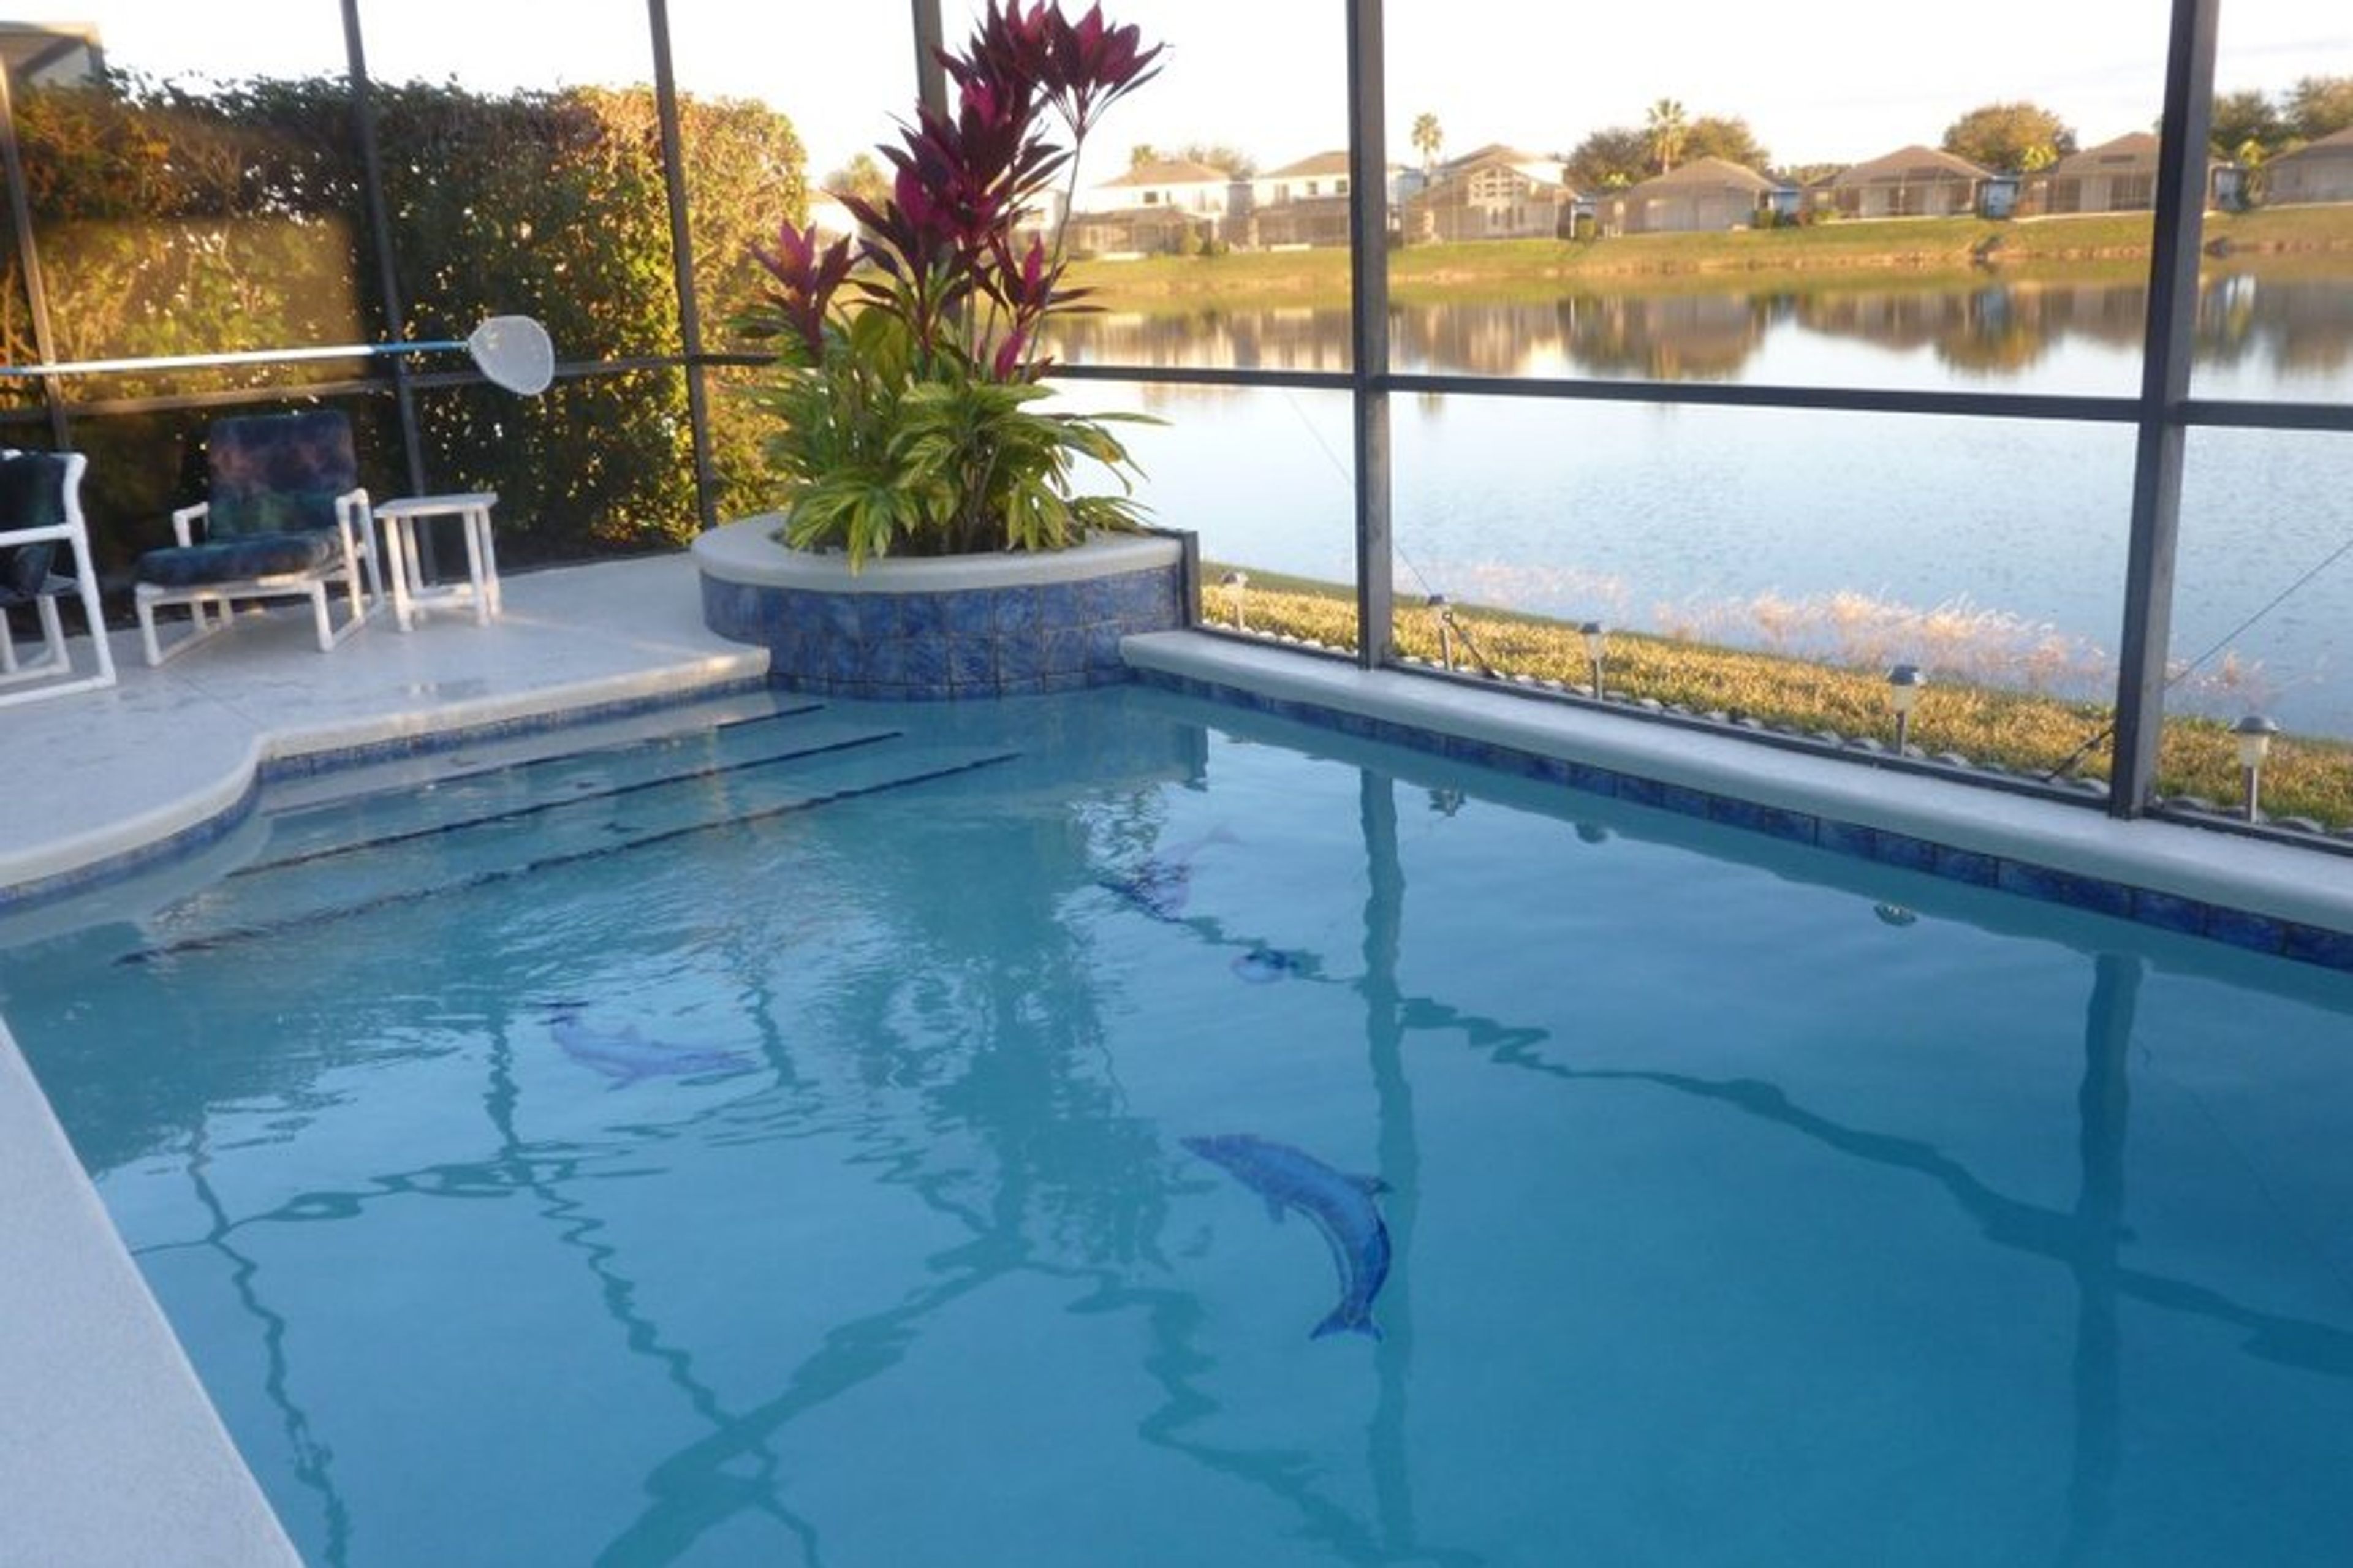 The pool can be heated for the winter months..enjoy your swim!